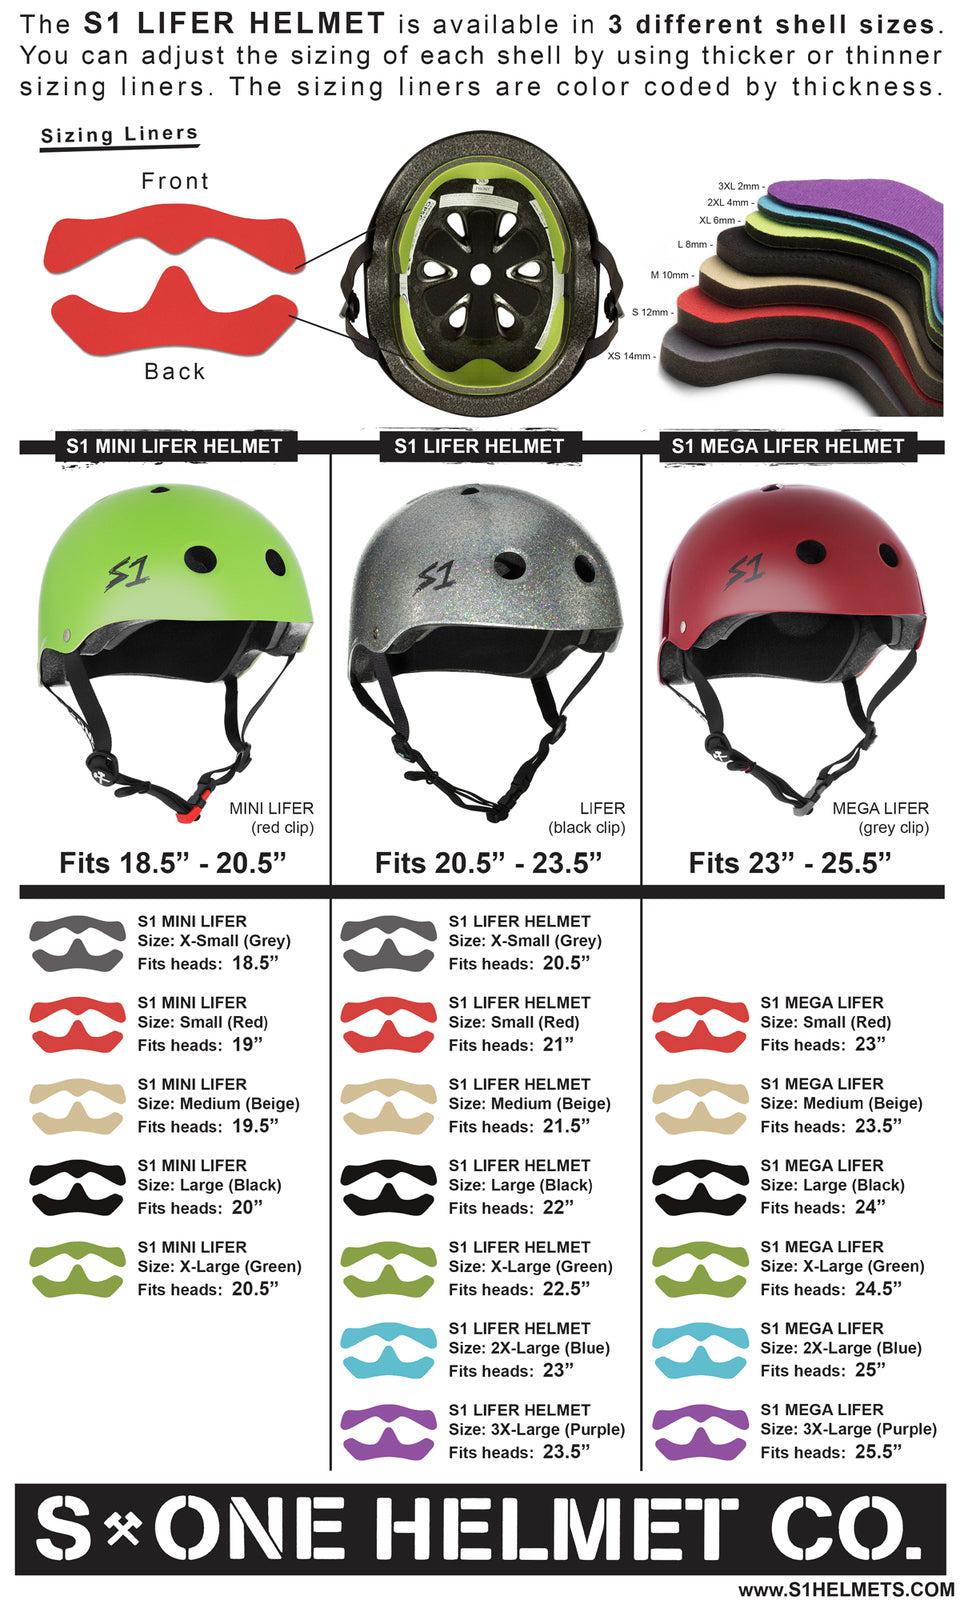 A flyer for the S1 Lifer helmet company, featuring S-One Helmet Liners and replacement options.